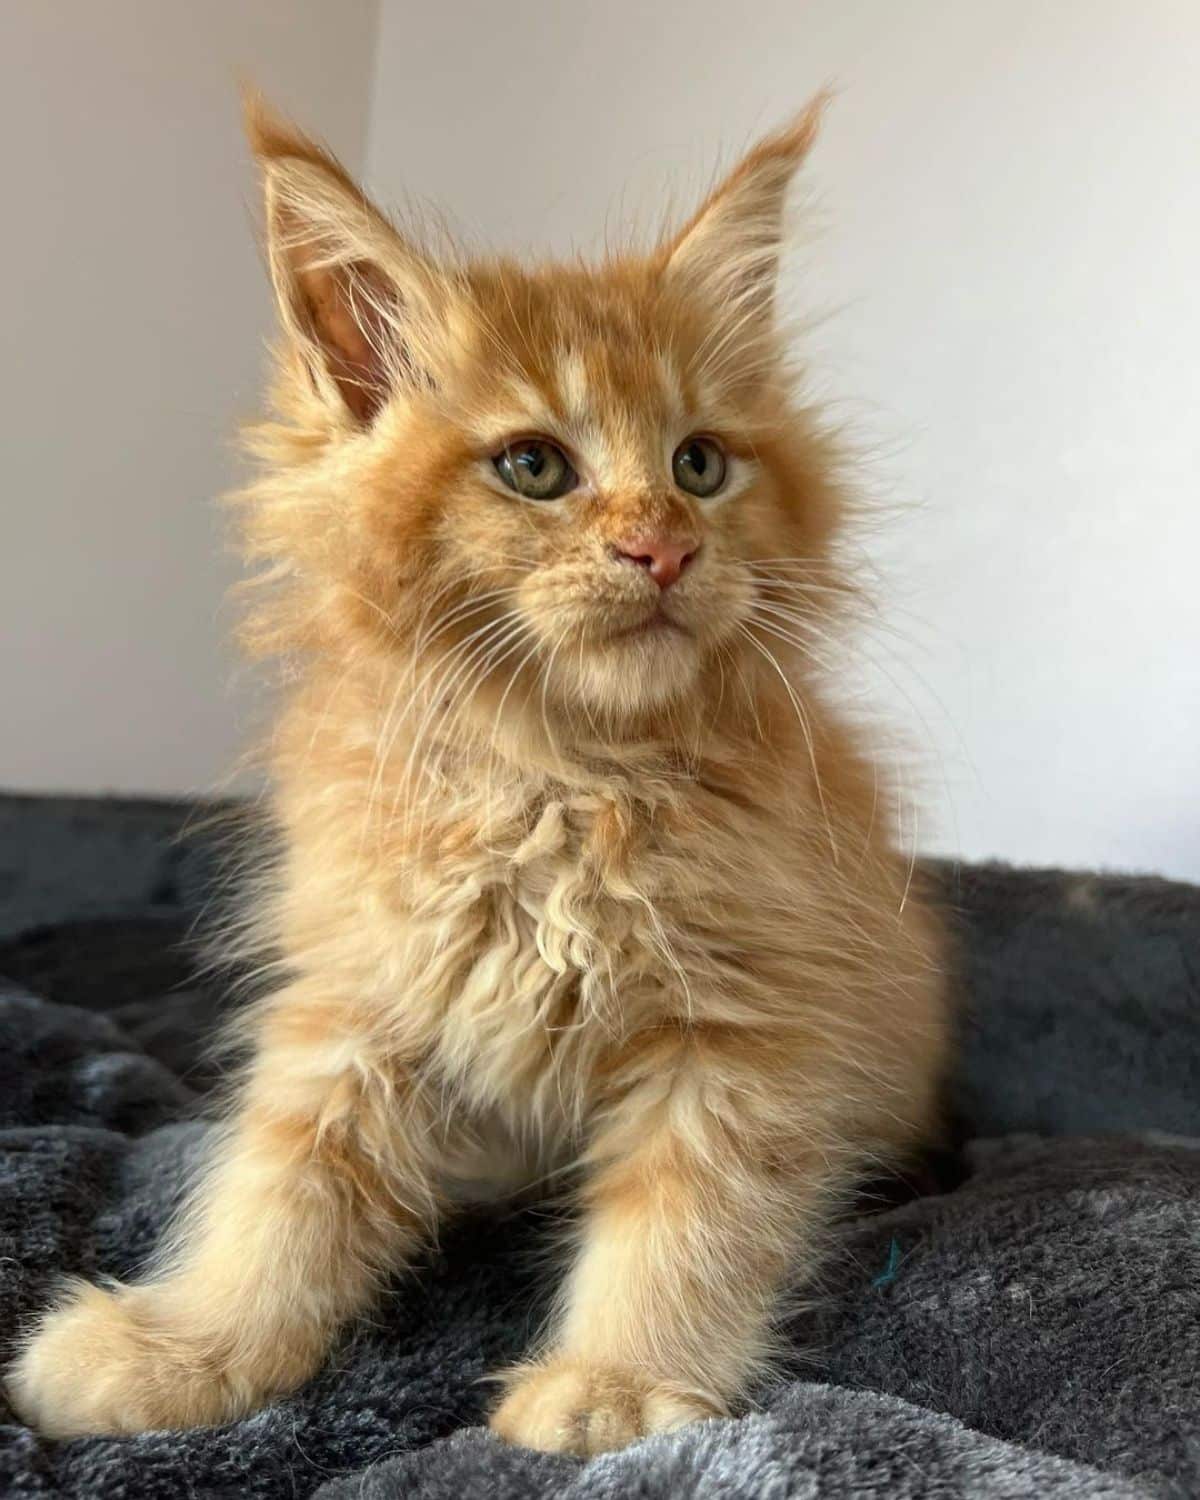 A fluffy ginger maine coon kitten lying on a cat bed.